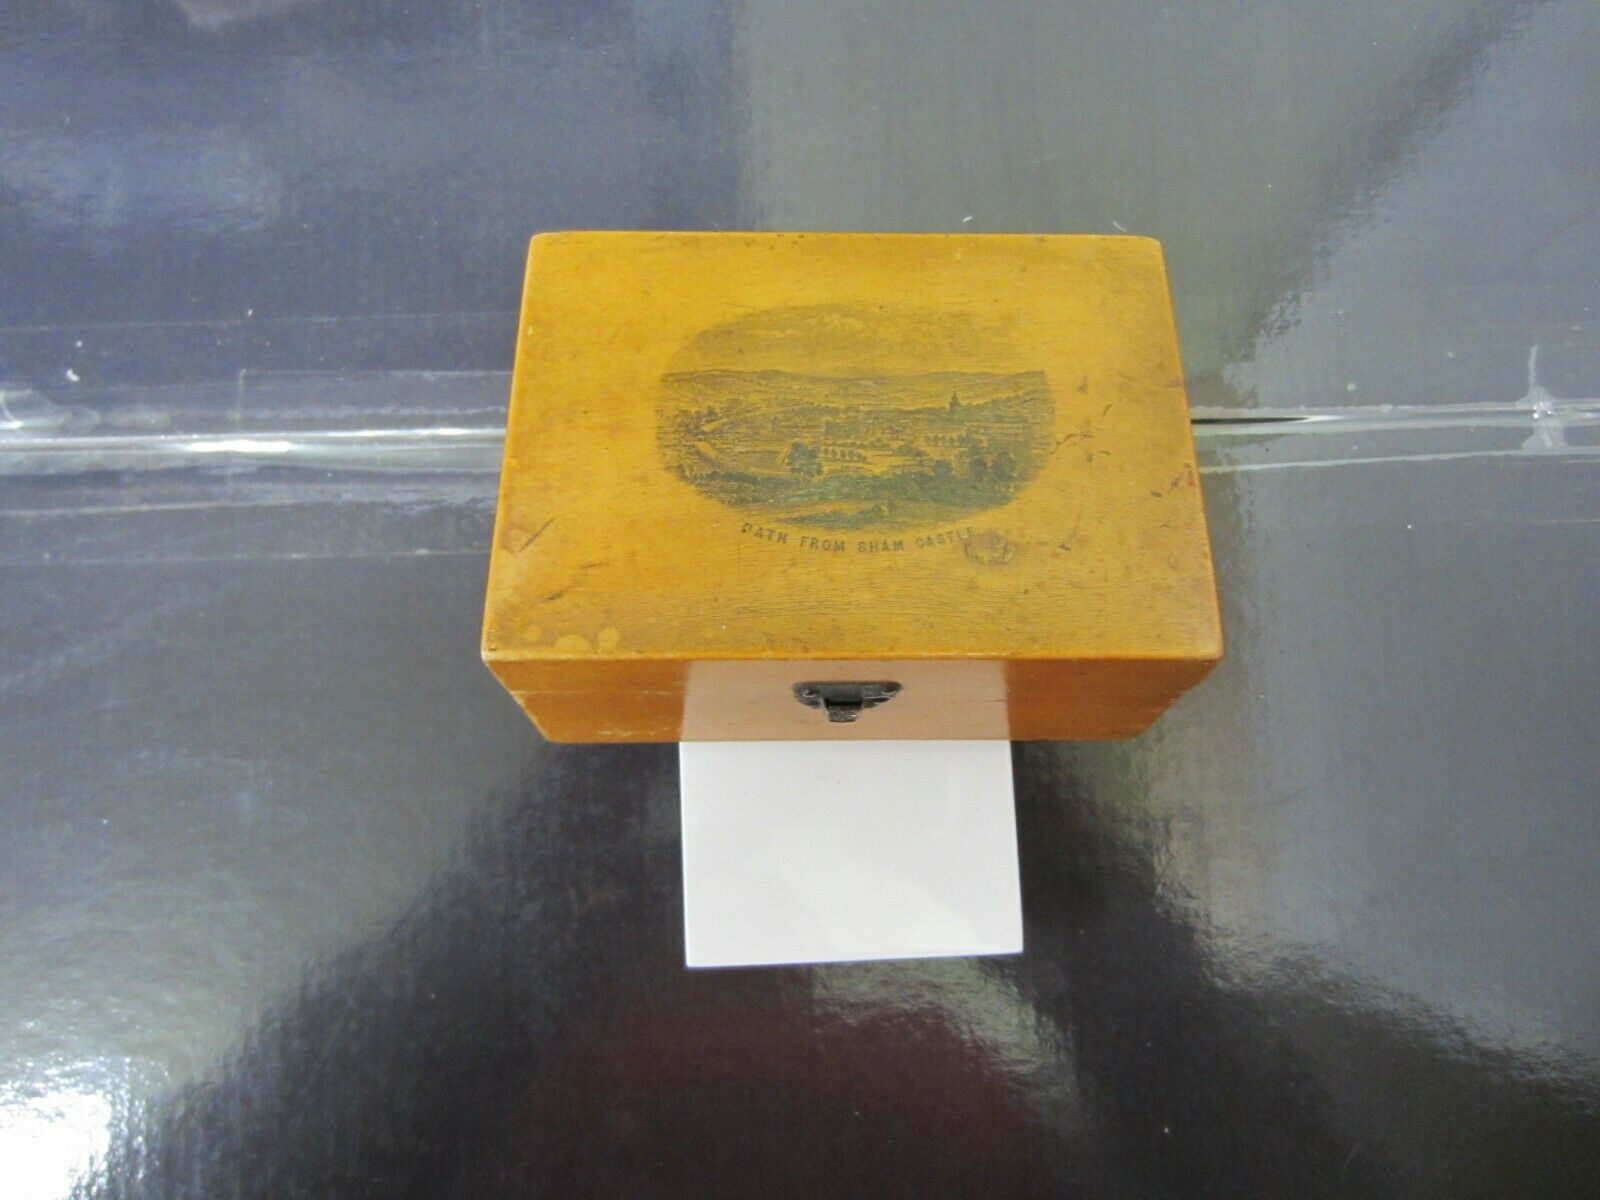 Transfer Ware Box with view of Bath from Sham Castle Mauchline Ware